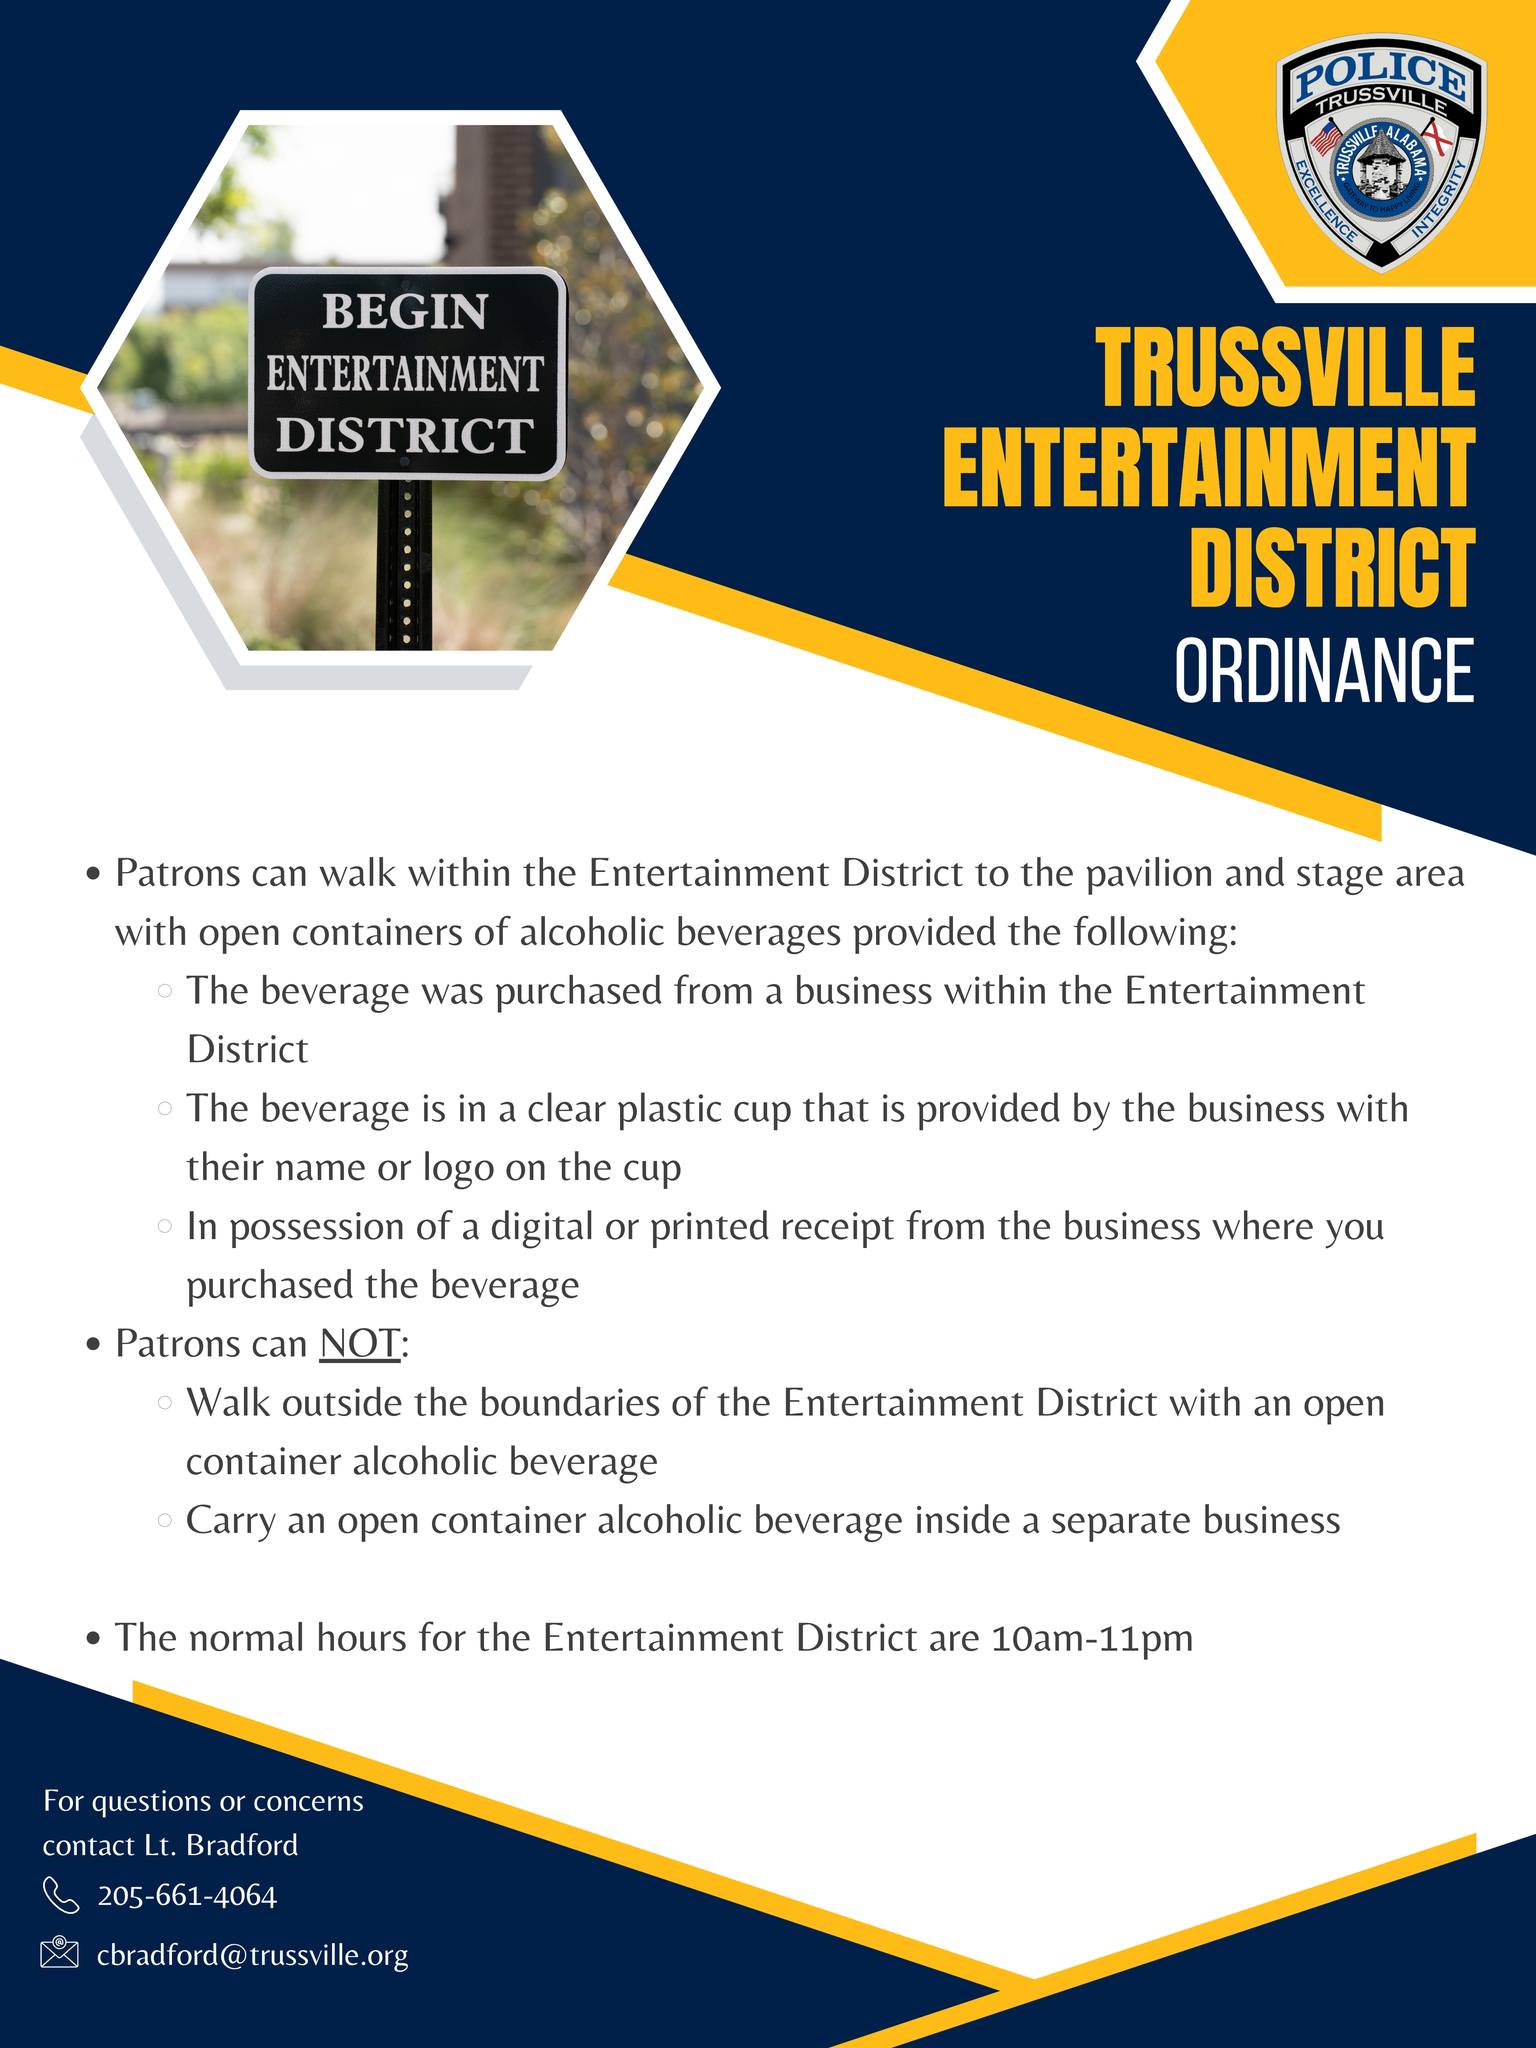 Trussville police department releases informational flyer for new entertainment district ordinance